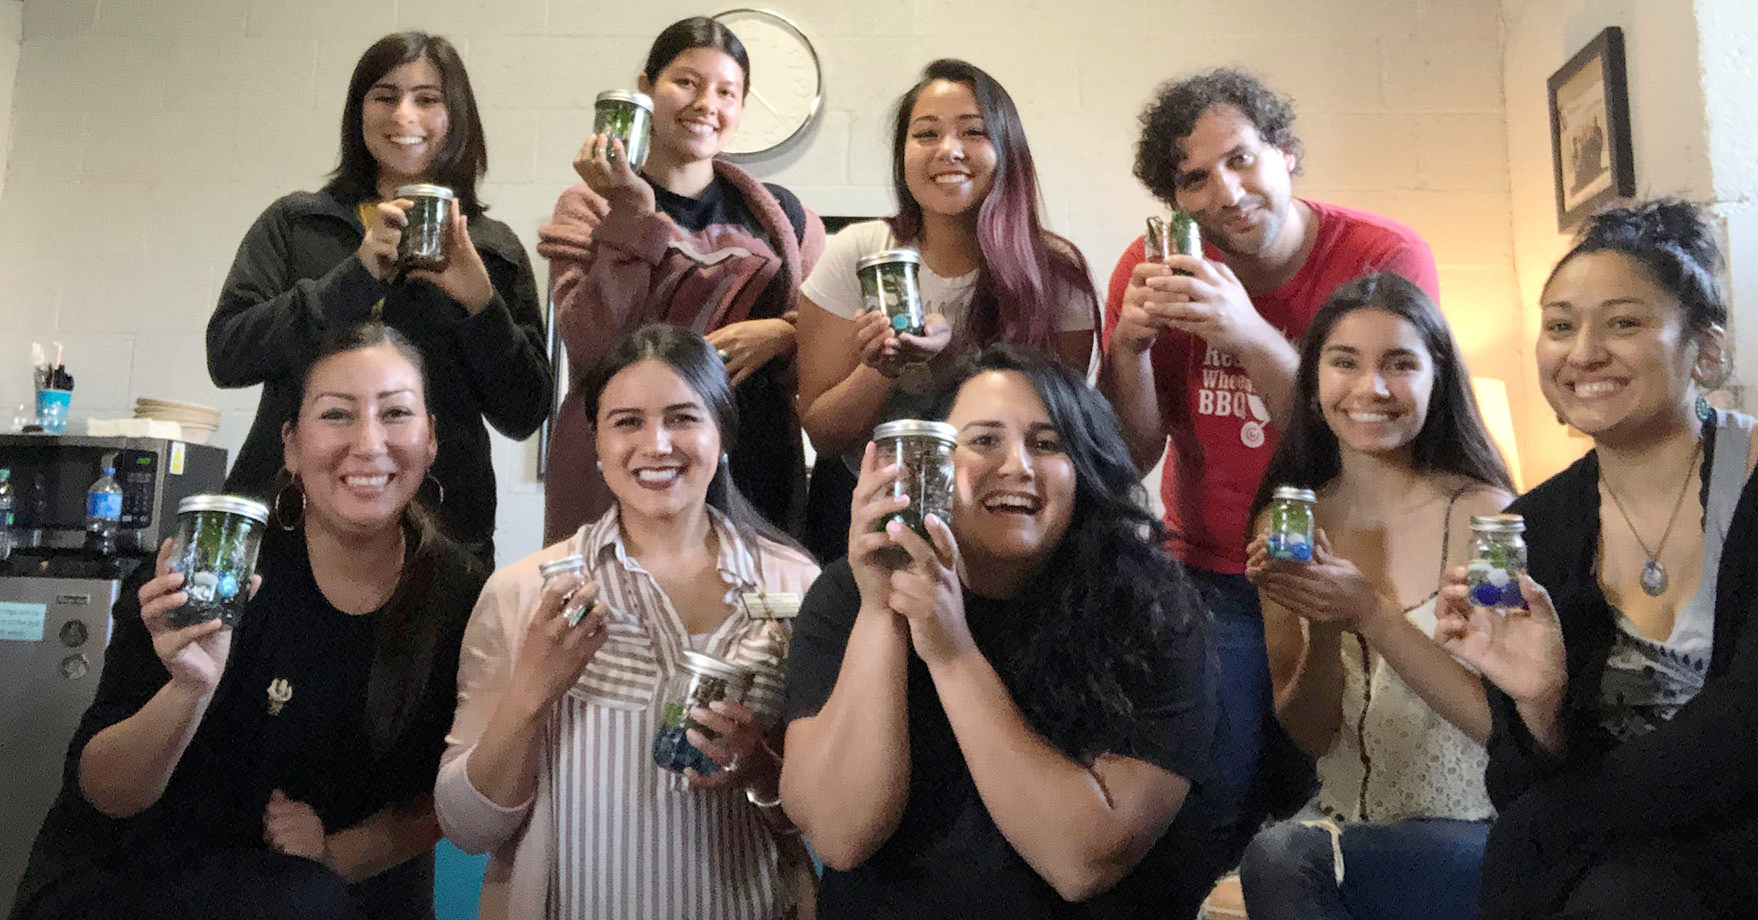 wellness group picture with jars